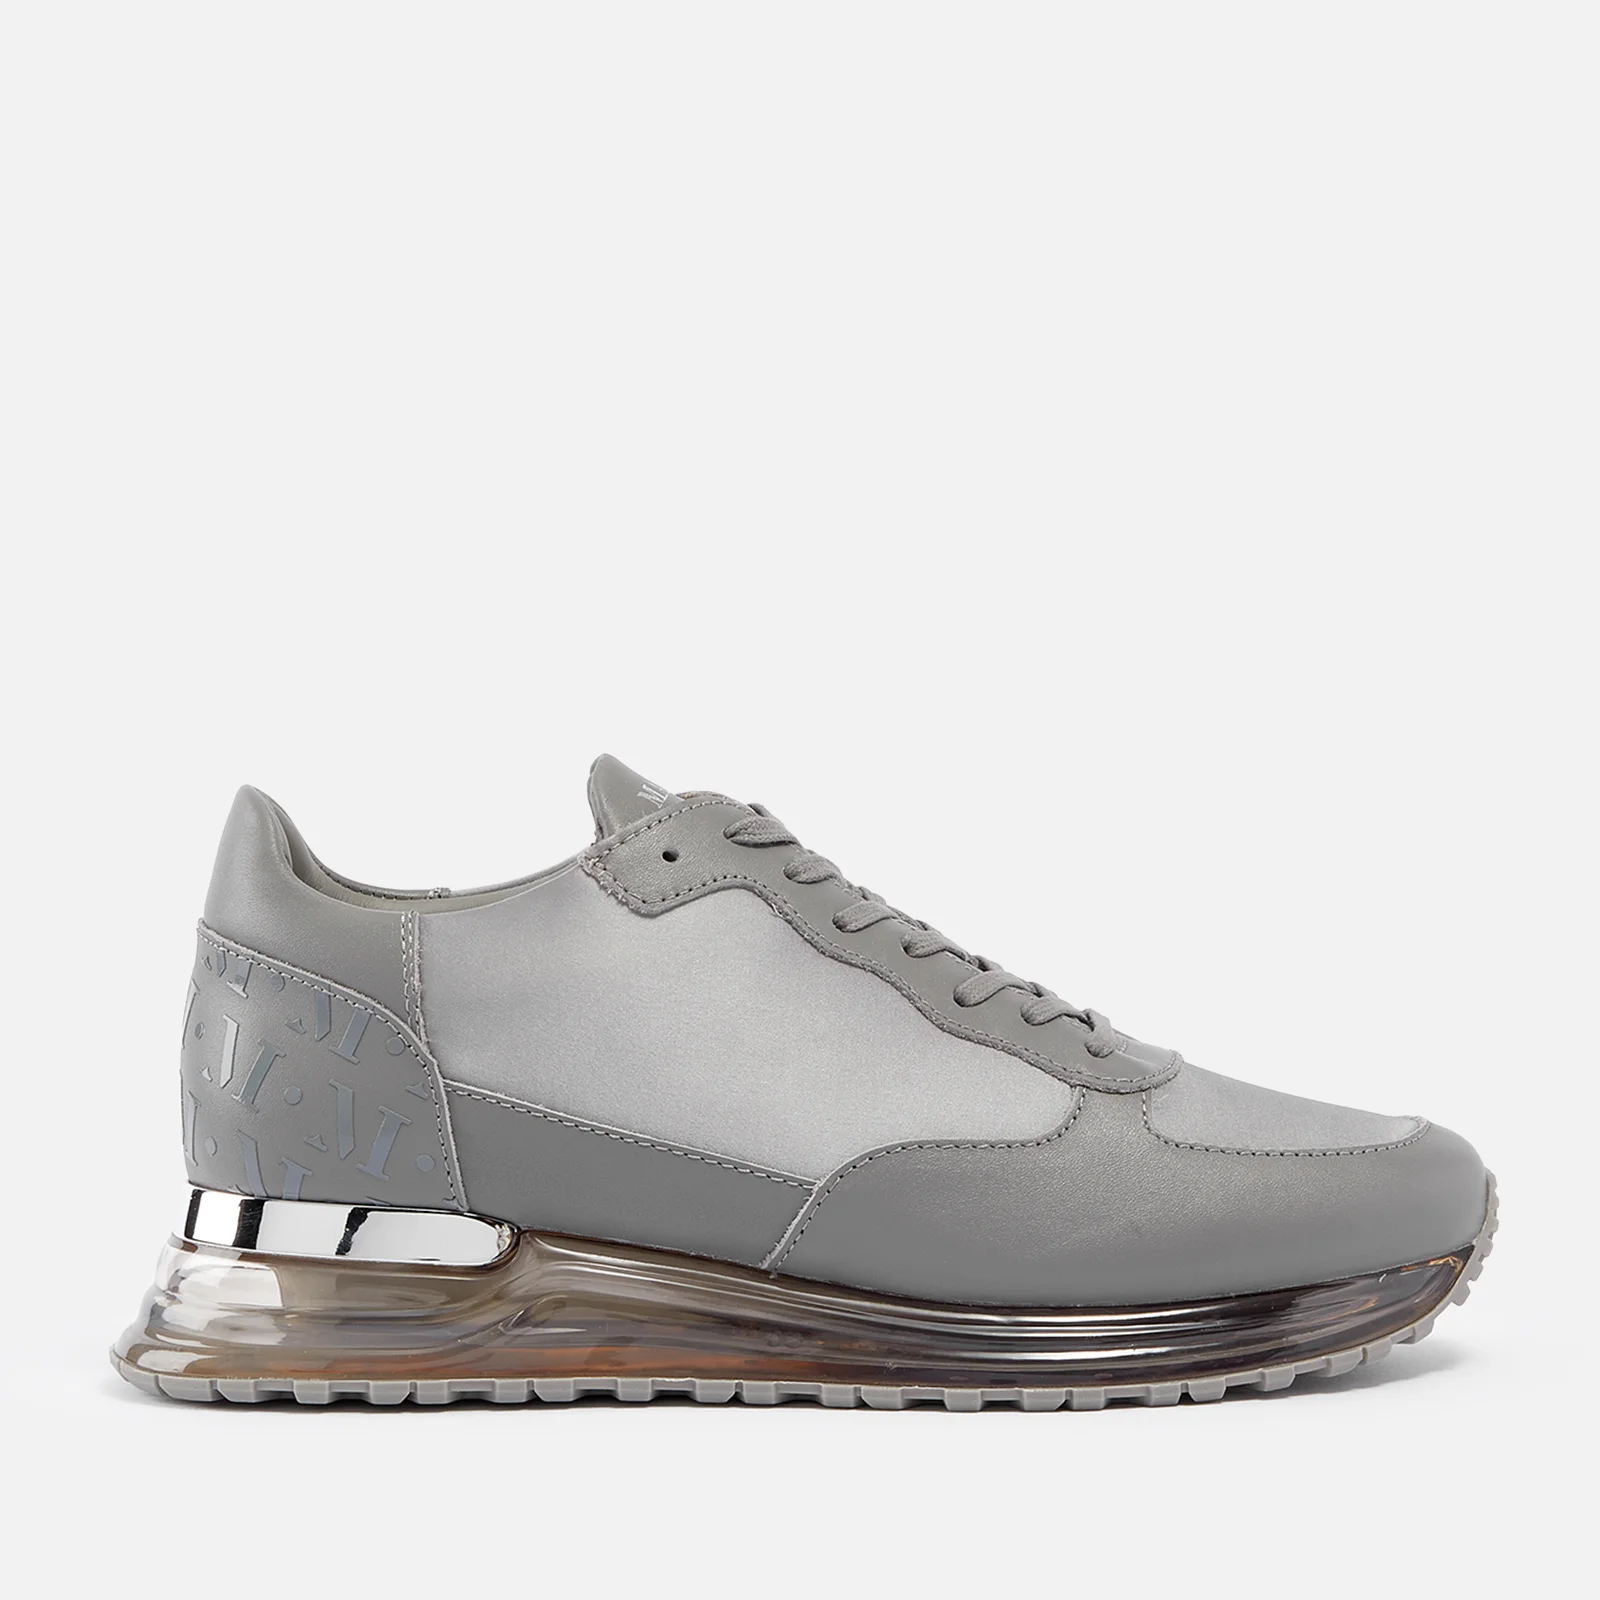 MALLET Popham Gas Leather and Satin Running-Style Trainers Image 1